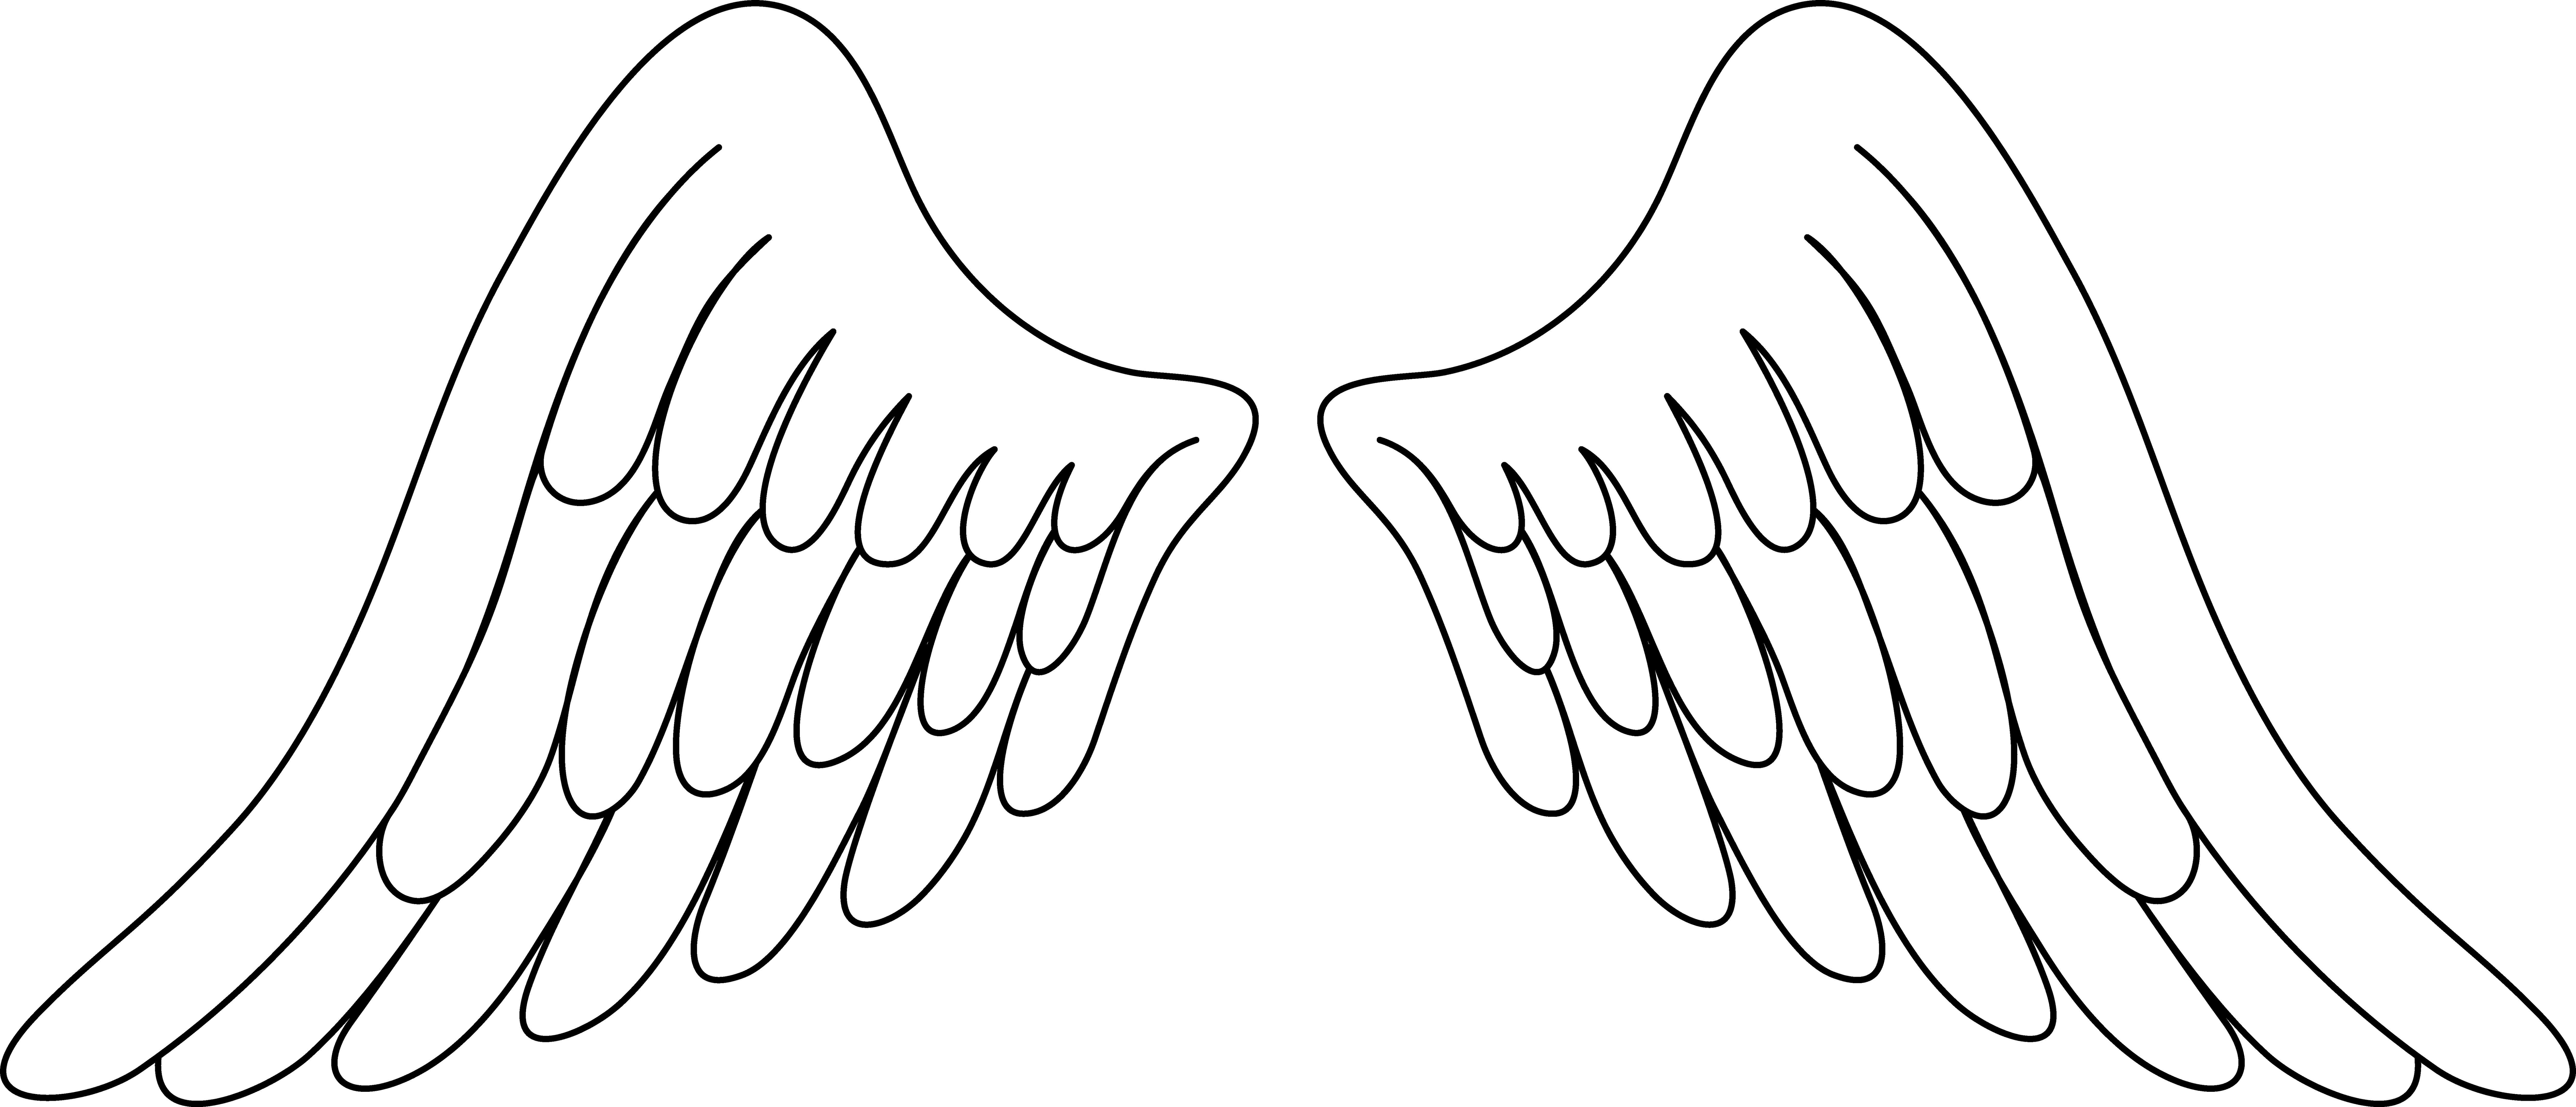 13 Pics of Angels With Wings Coloring Pages - Angel Wings with ...